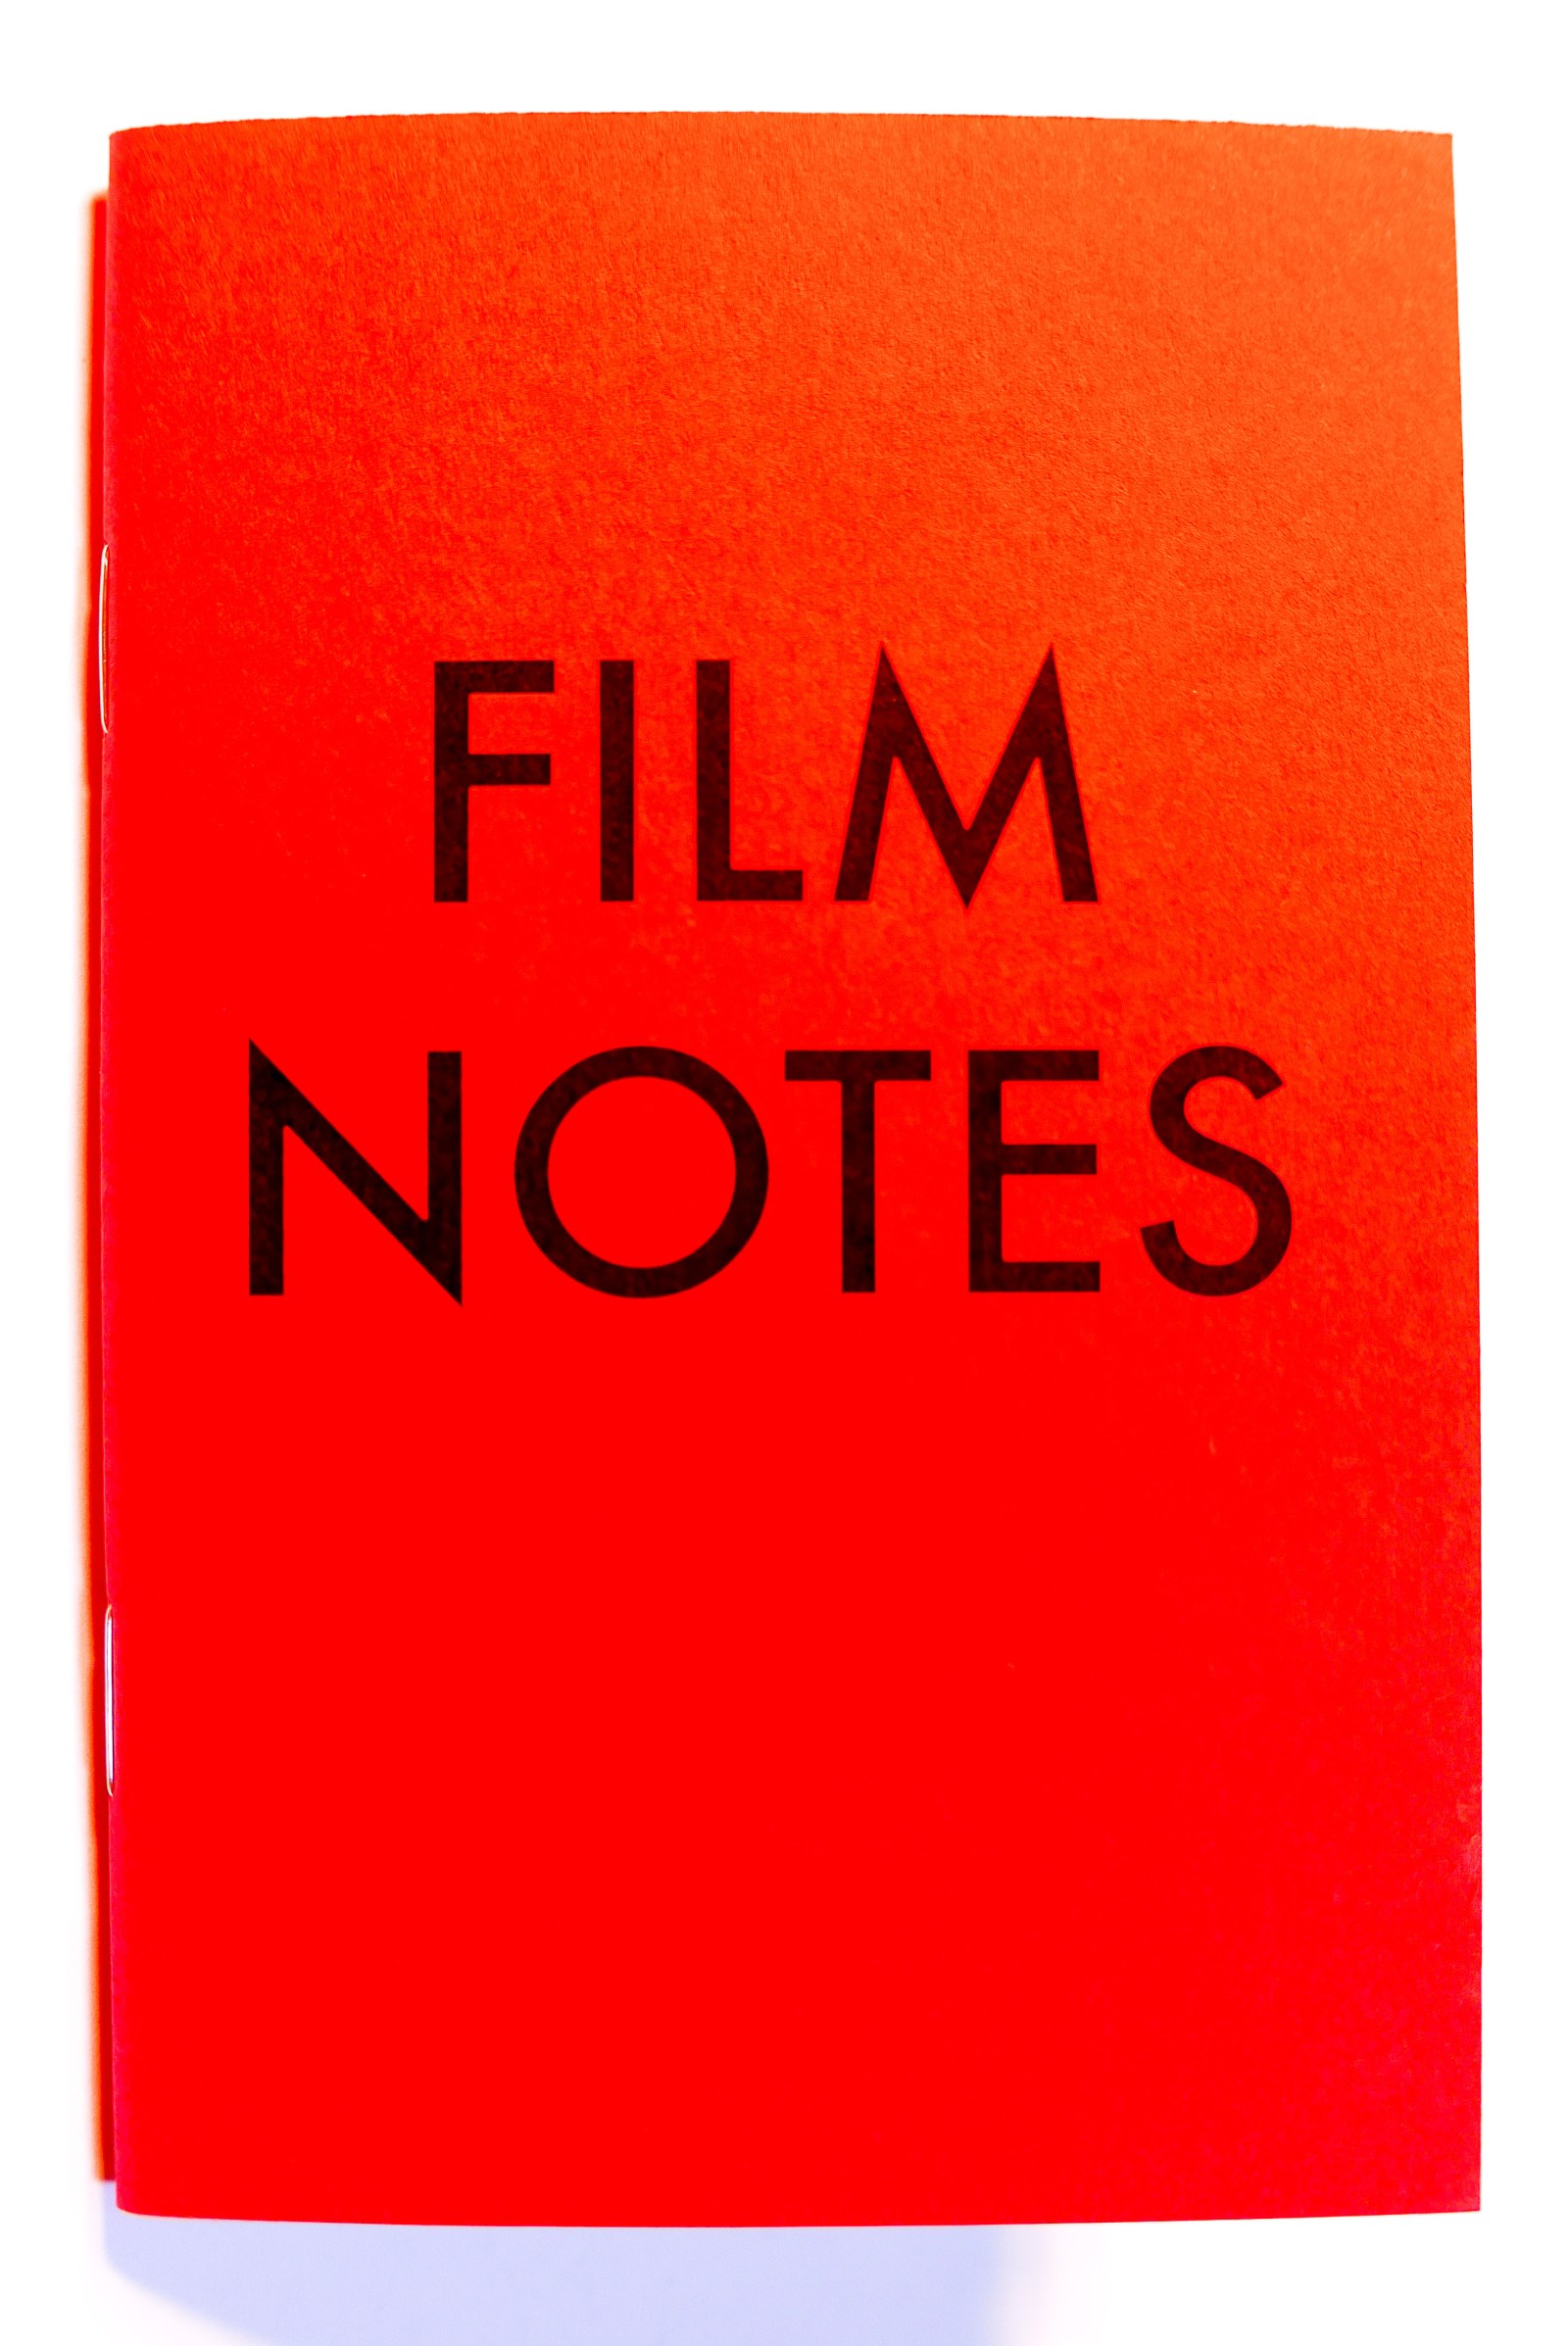 Say Hello to FILM NOTES